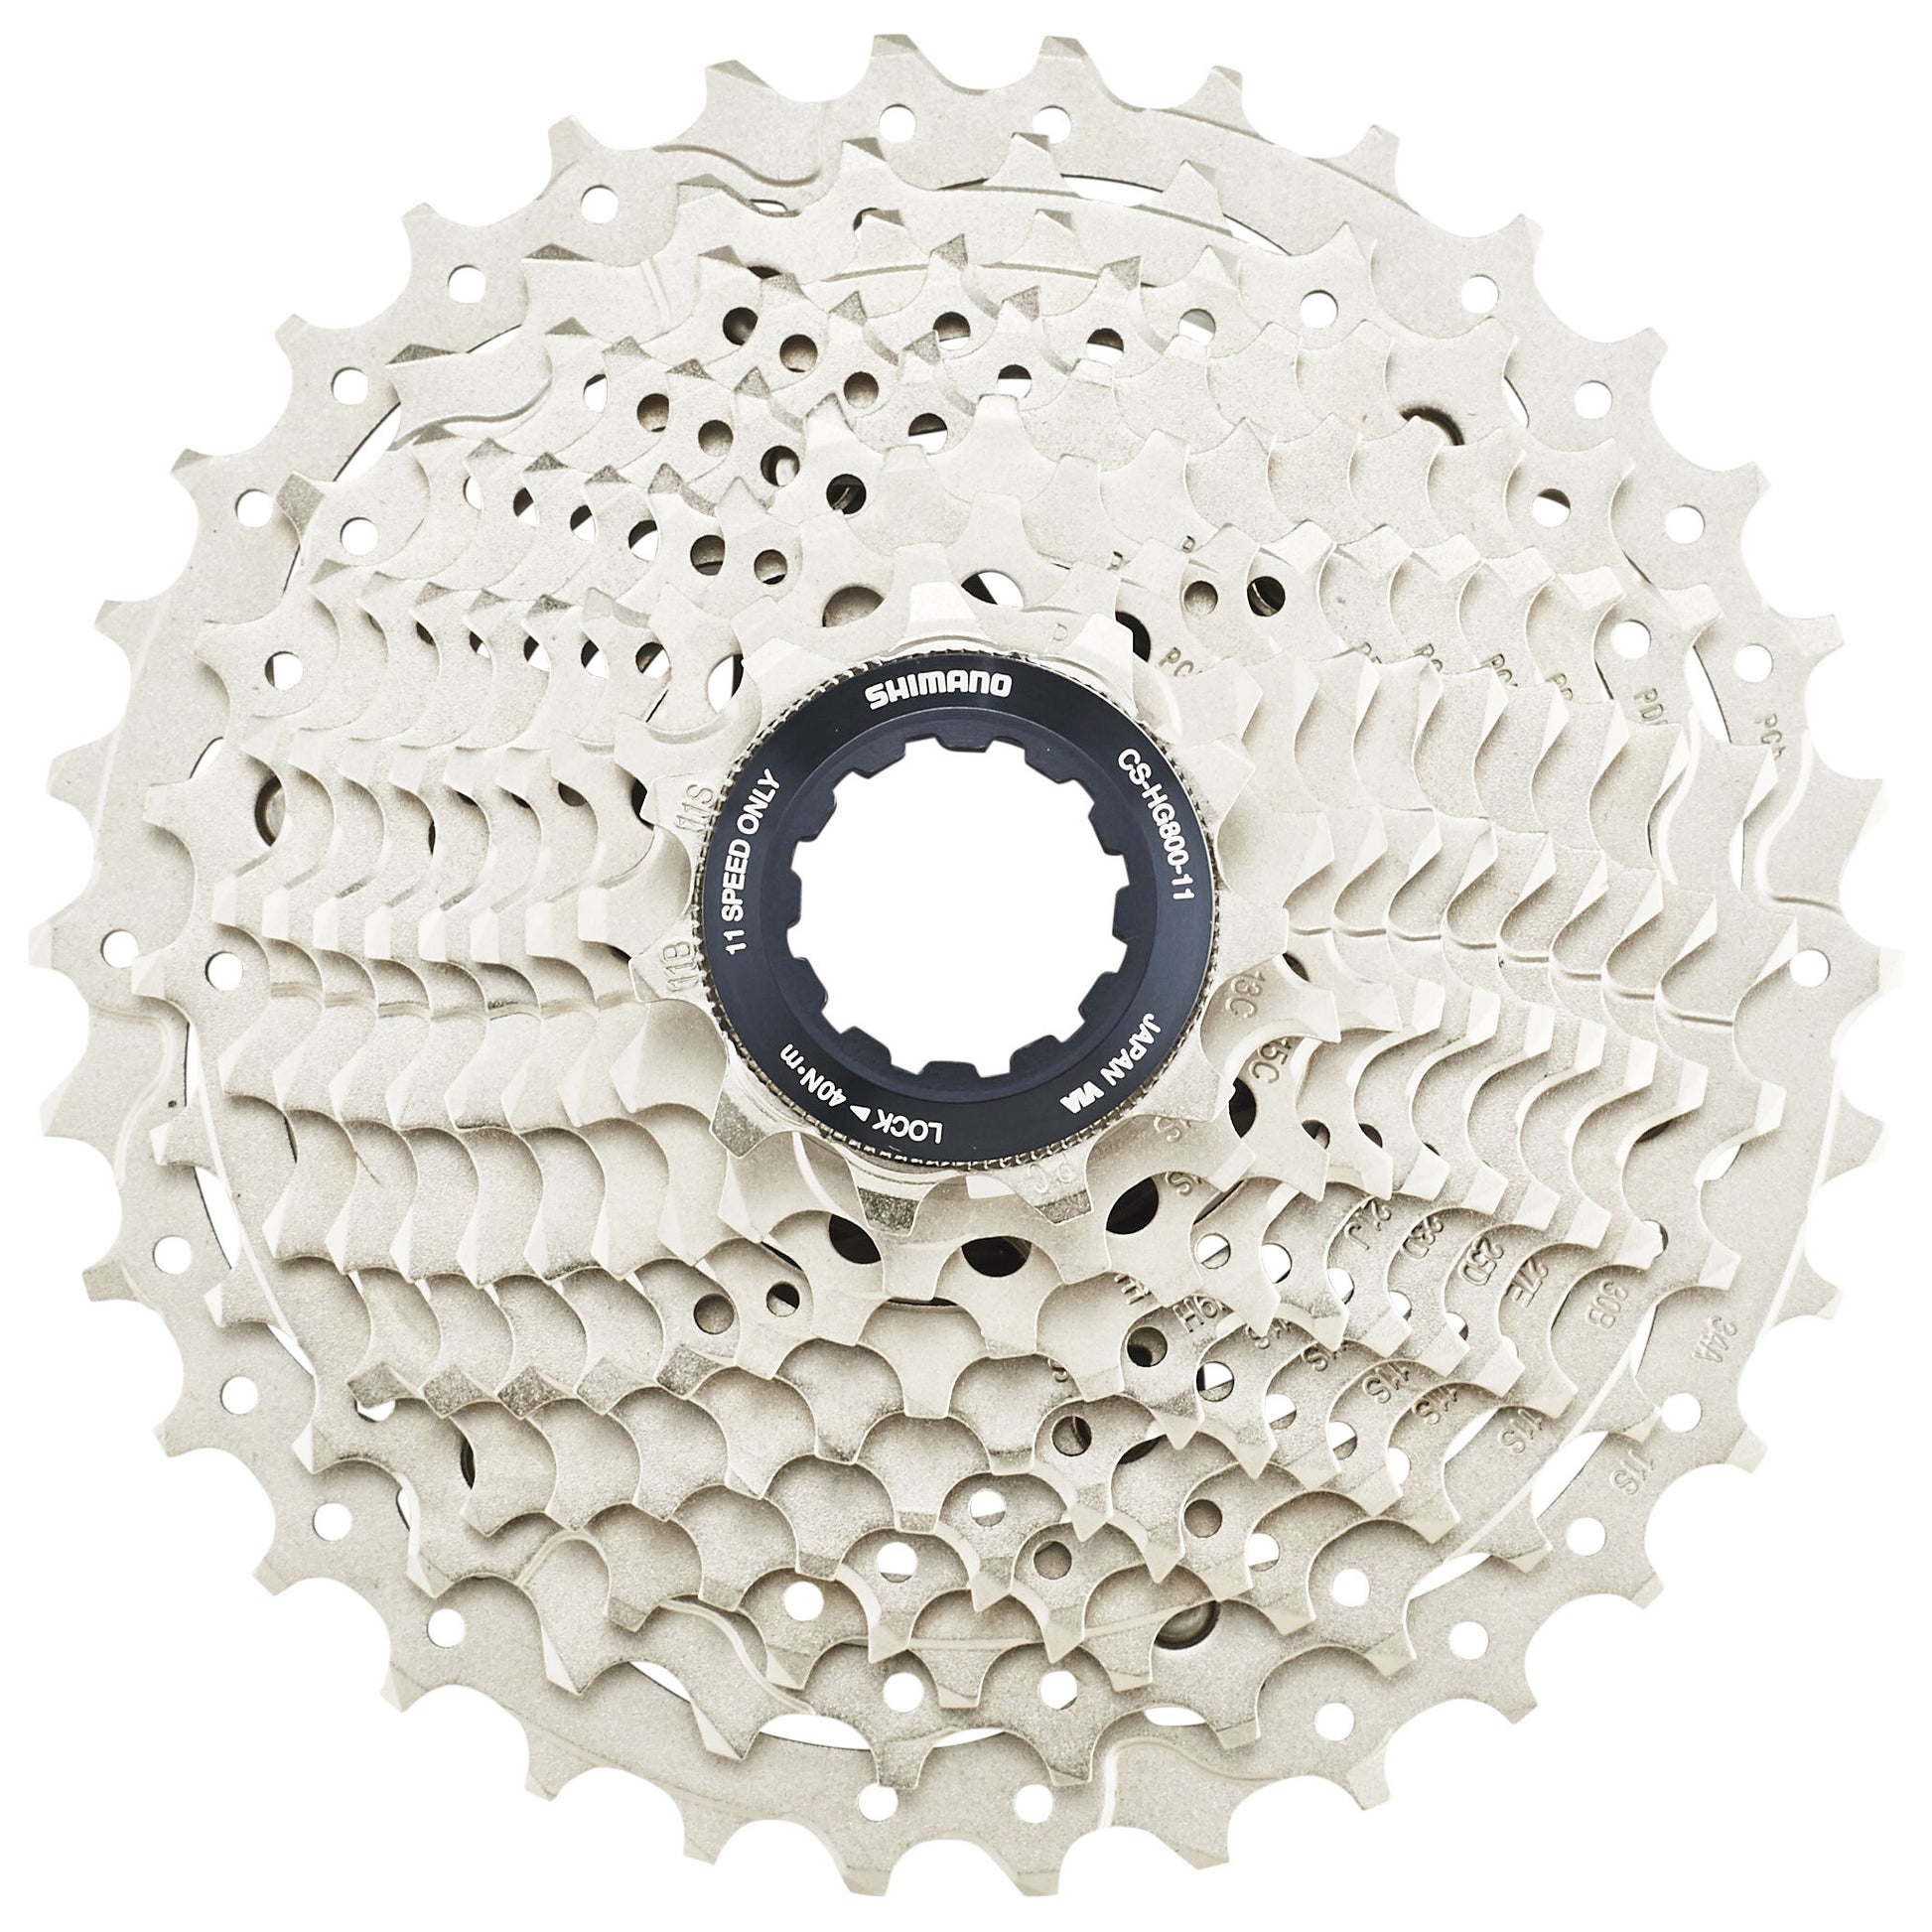 Shimano CS-HG800 Cassette 11-34 Tooth 11 Speed buy at Woolys Wheels Sydney